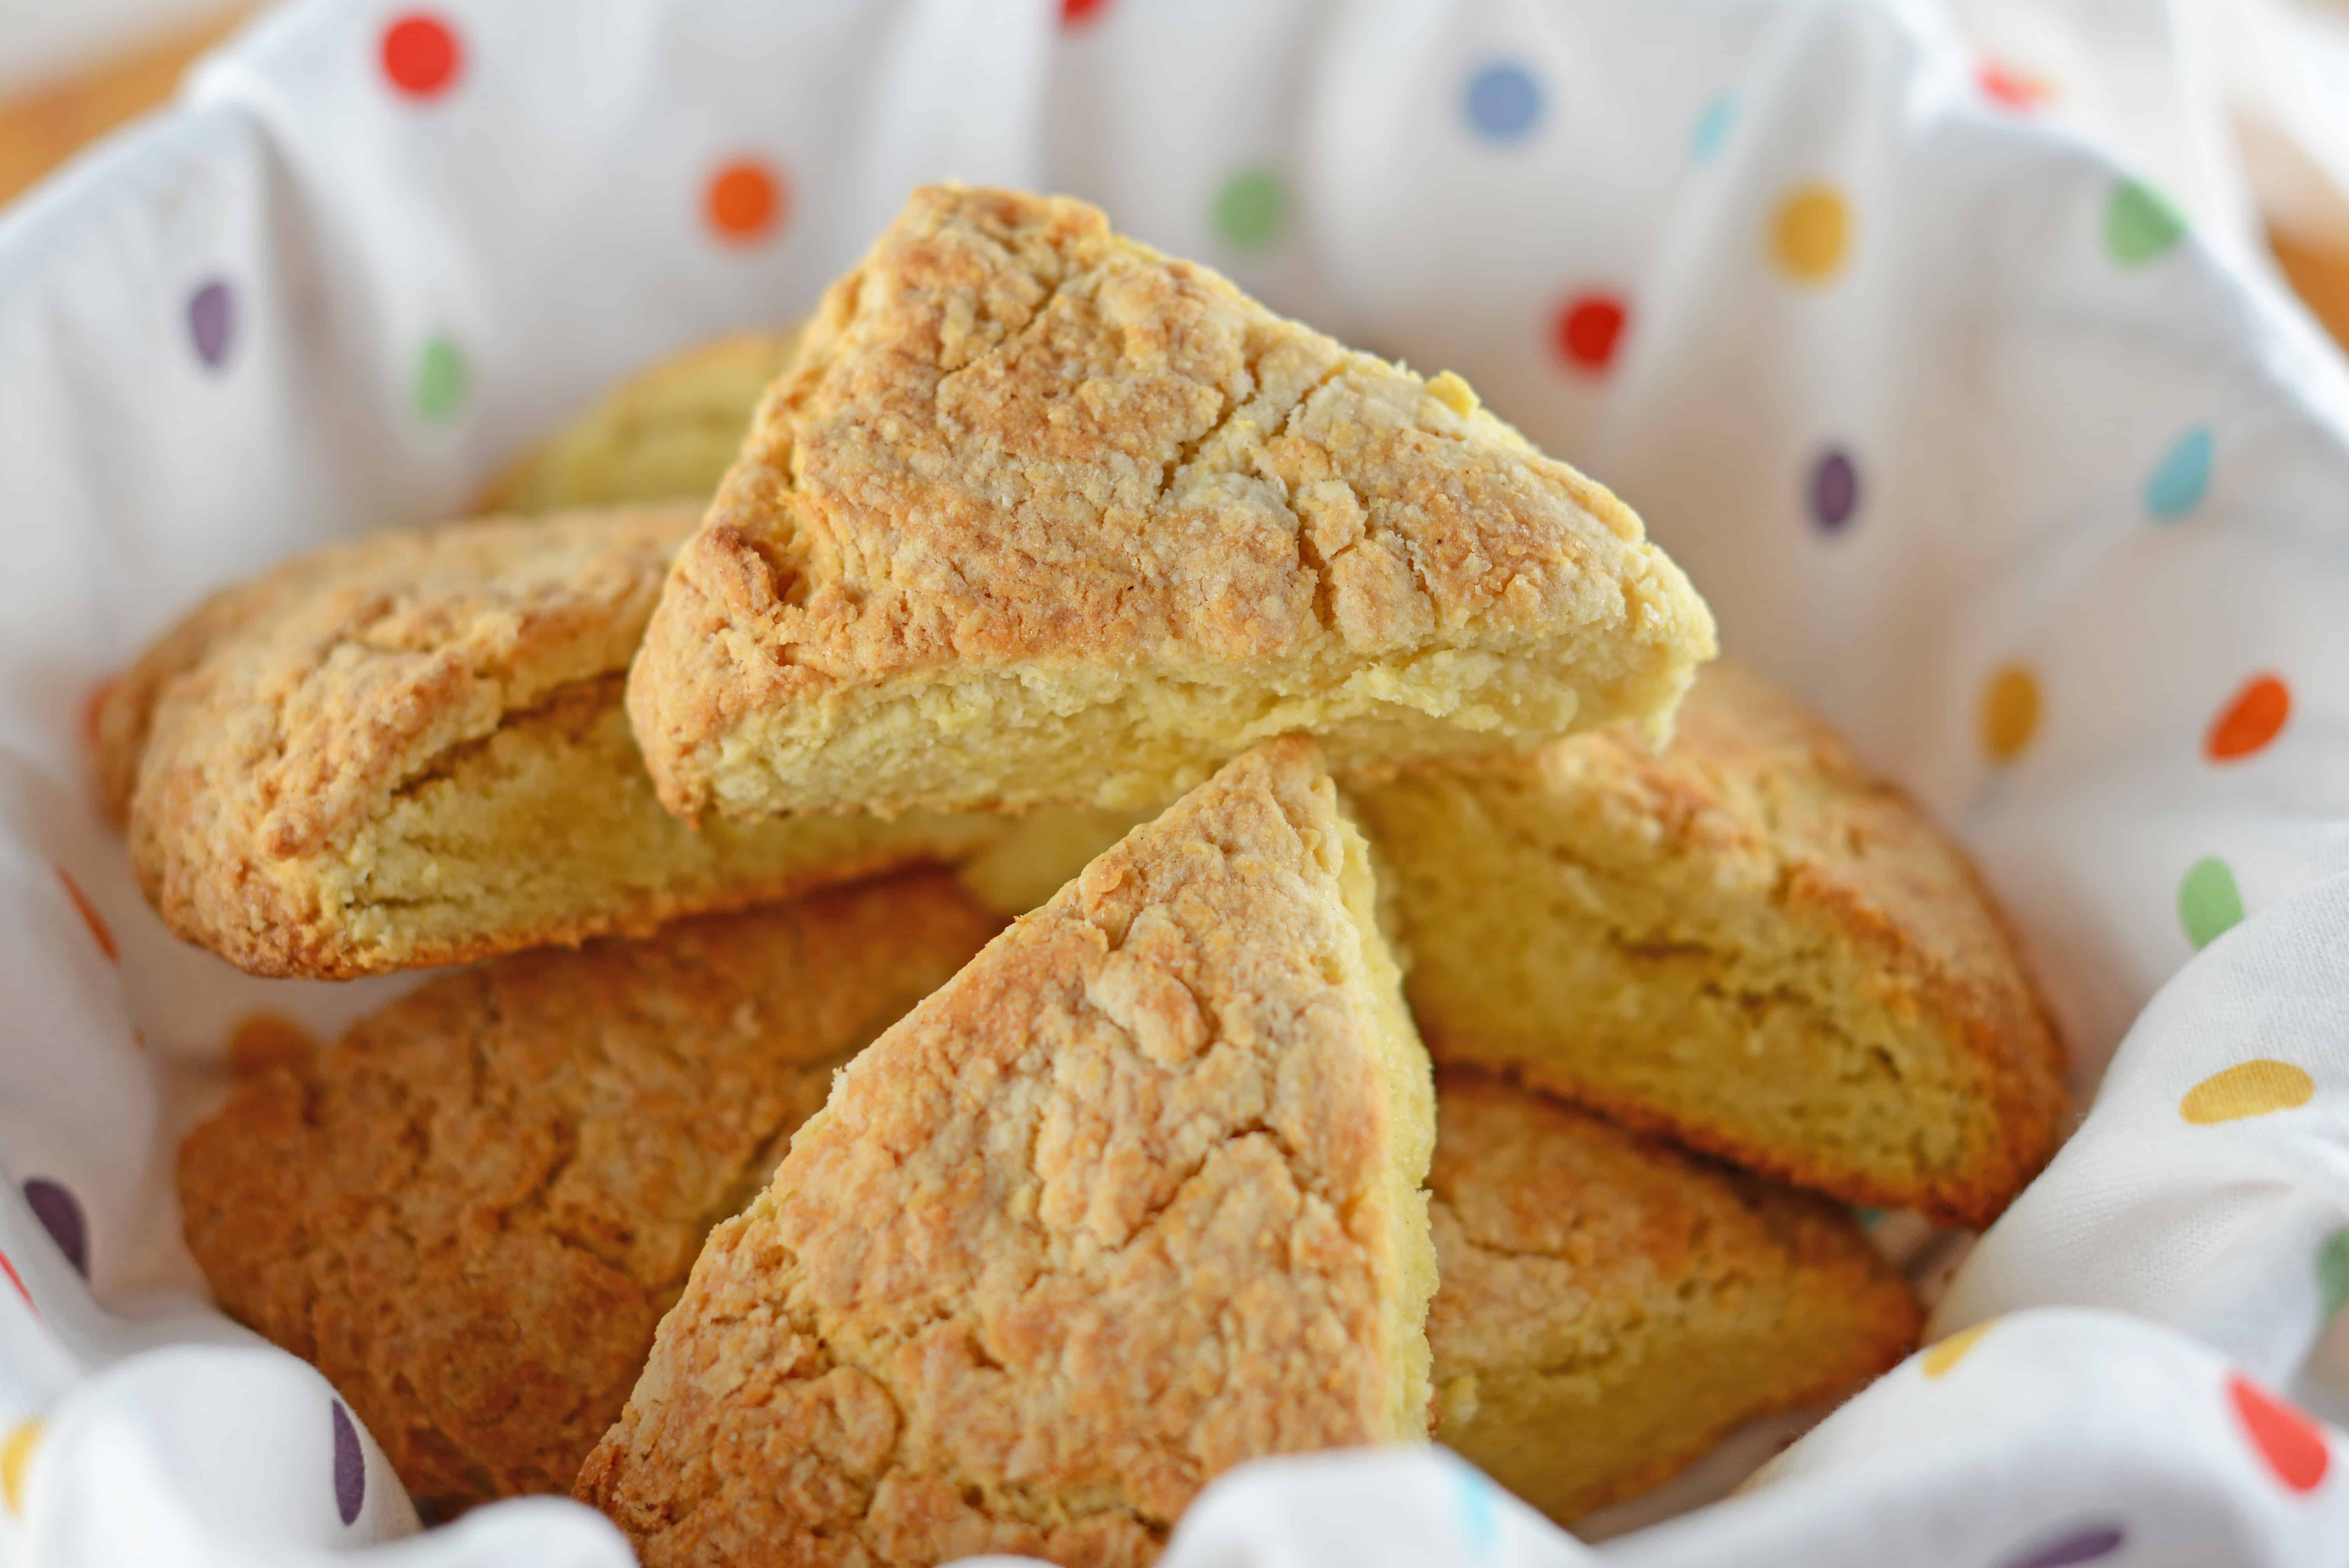 English Scones can be the perfect addition to any brunch or afternoon tea. They are simple to make and even tastier to eat!